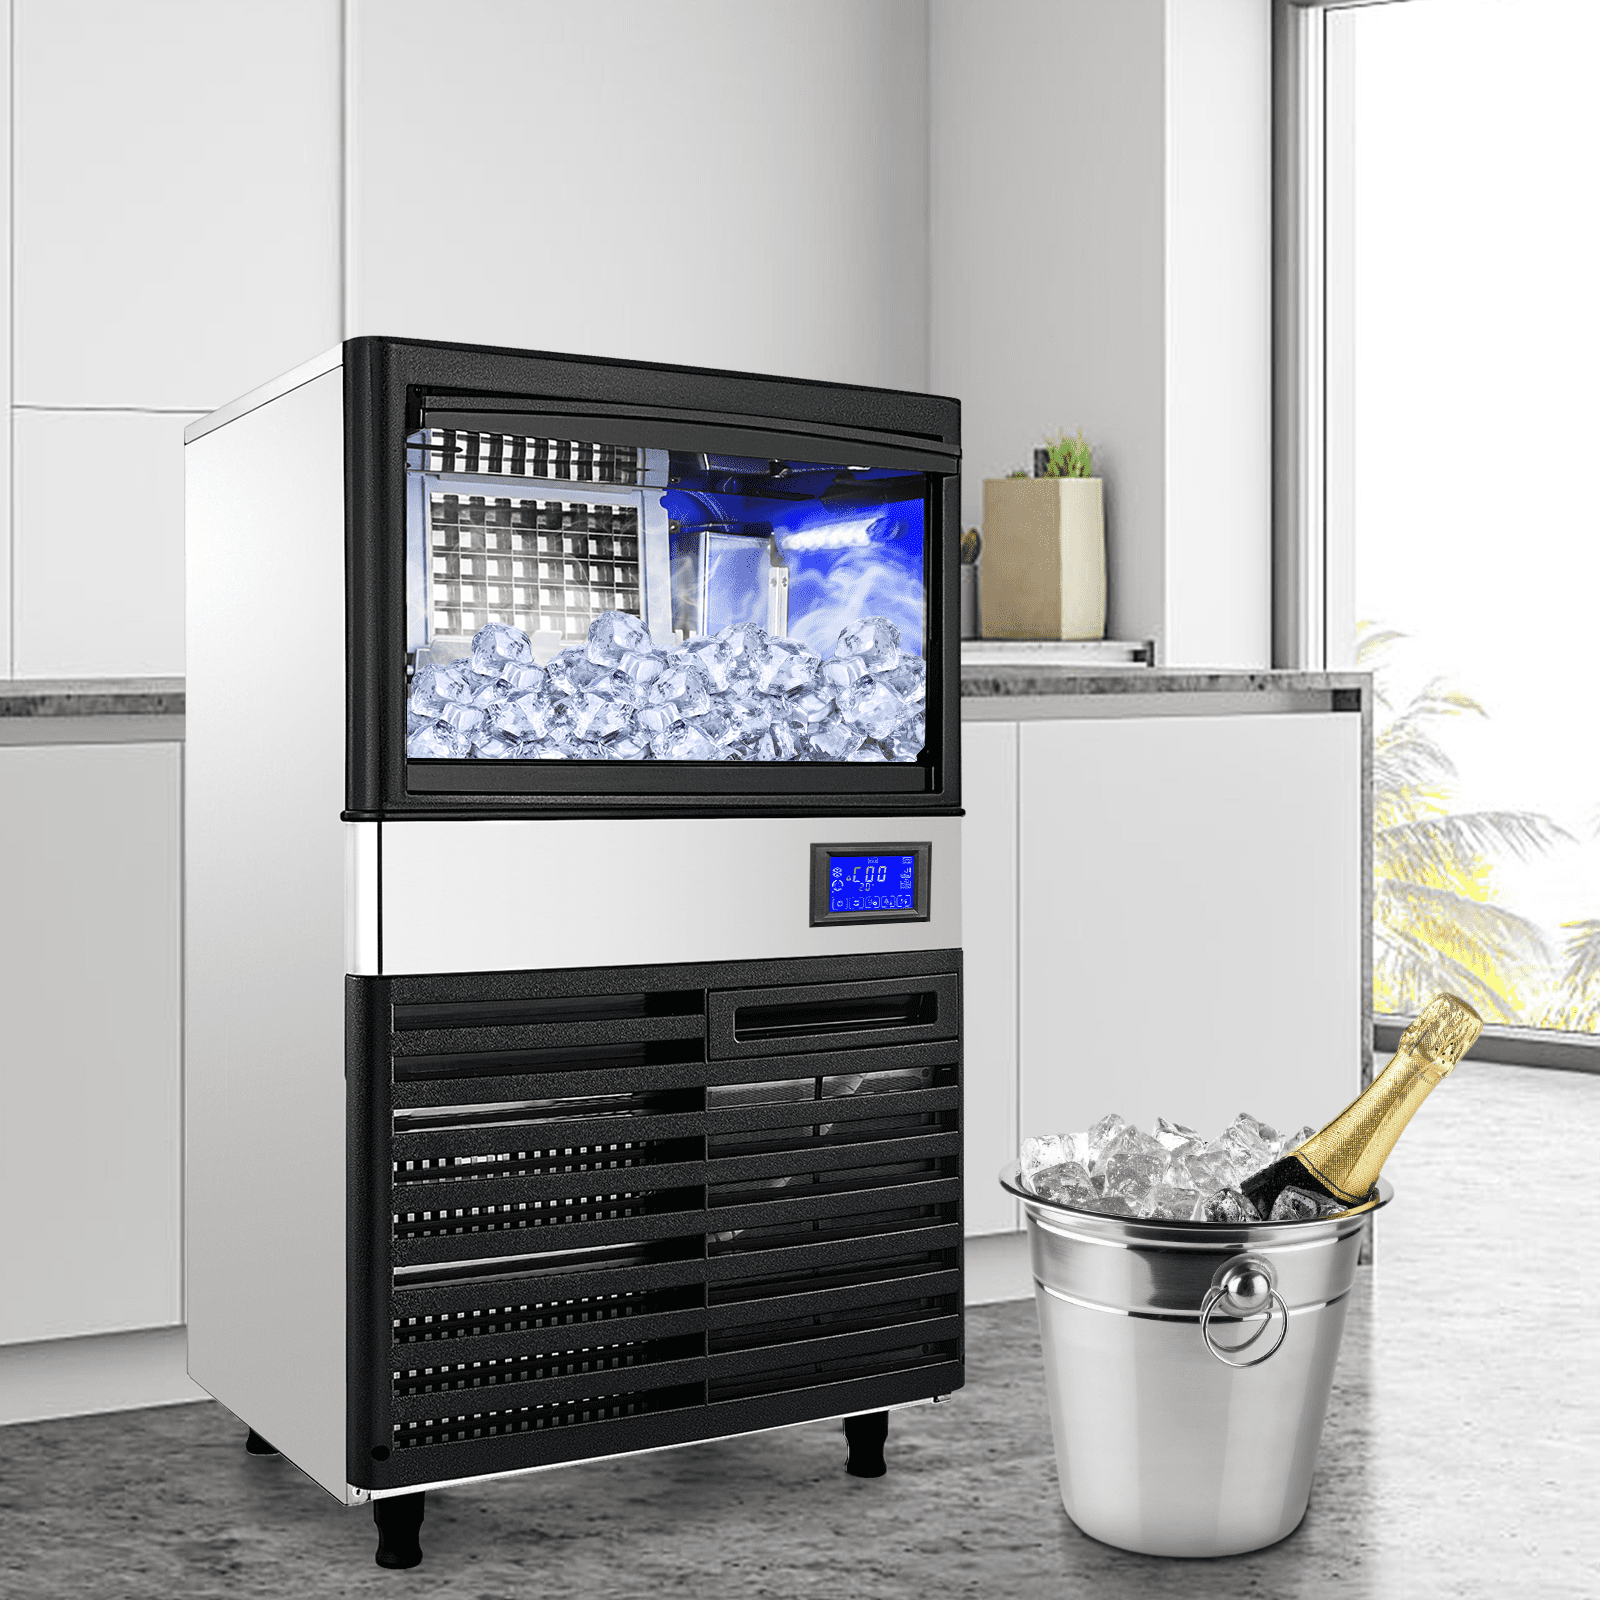 VEVORbrand 110V Commercial Ice Maker 110 lbs/24H with 44 lbs Bin and  Electric Water Drain Pump, Clear Cube, Stainless Steel Construction, Auto